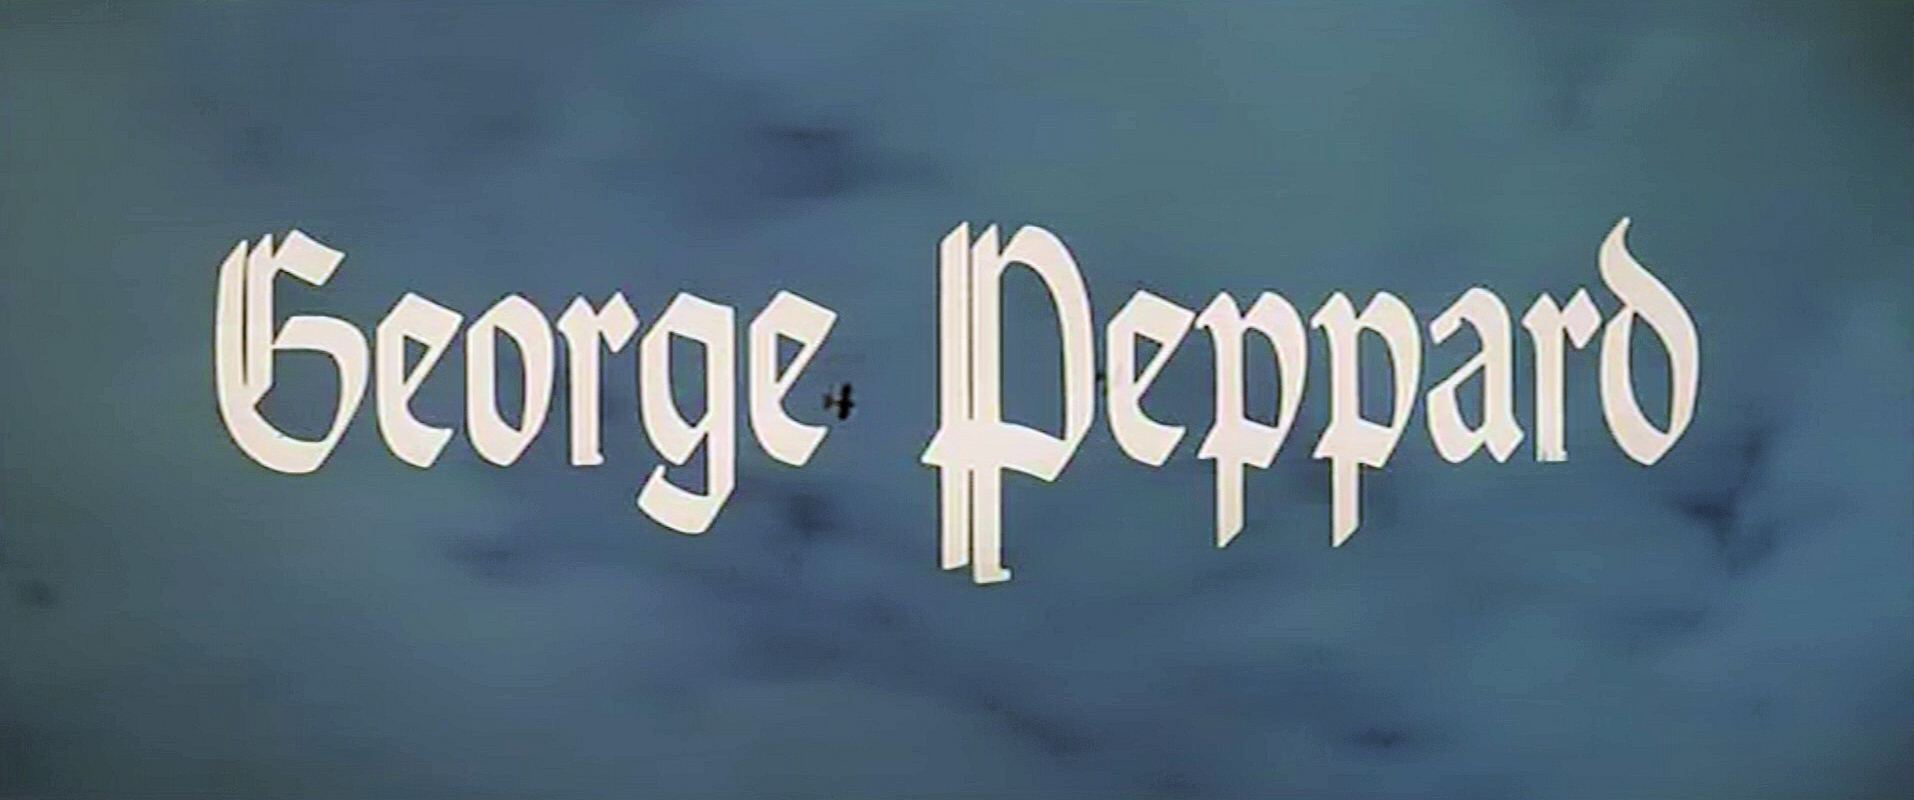 Main title from The Blue Max (1966) (3). George Peppard